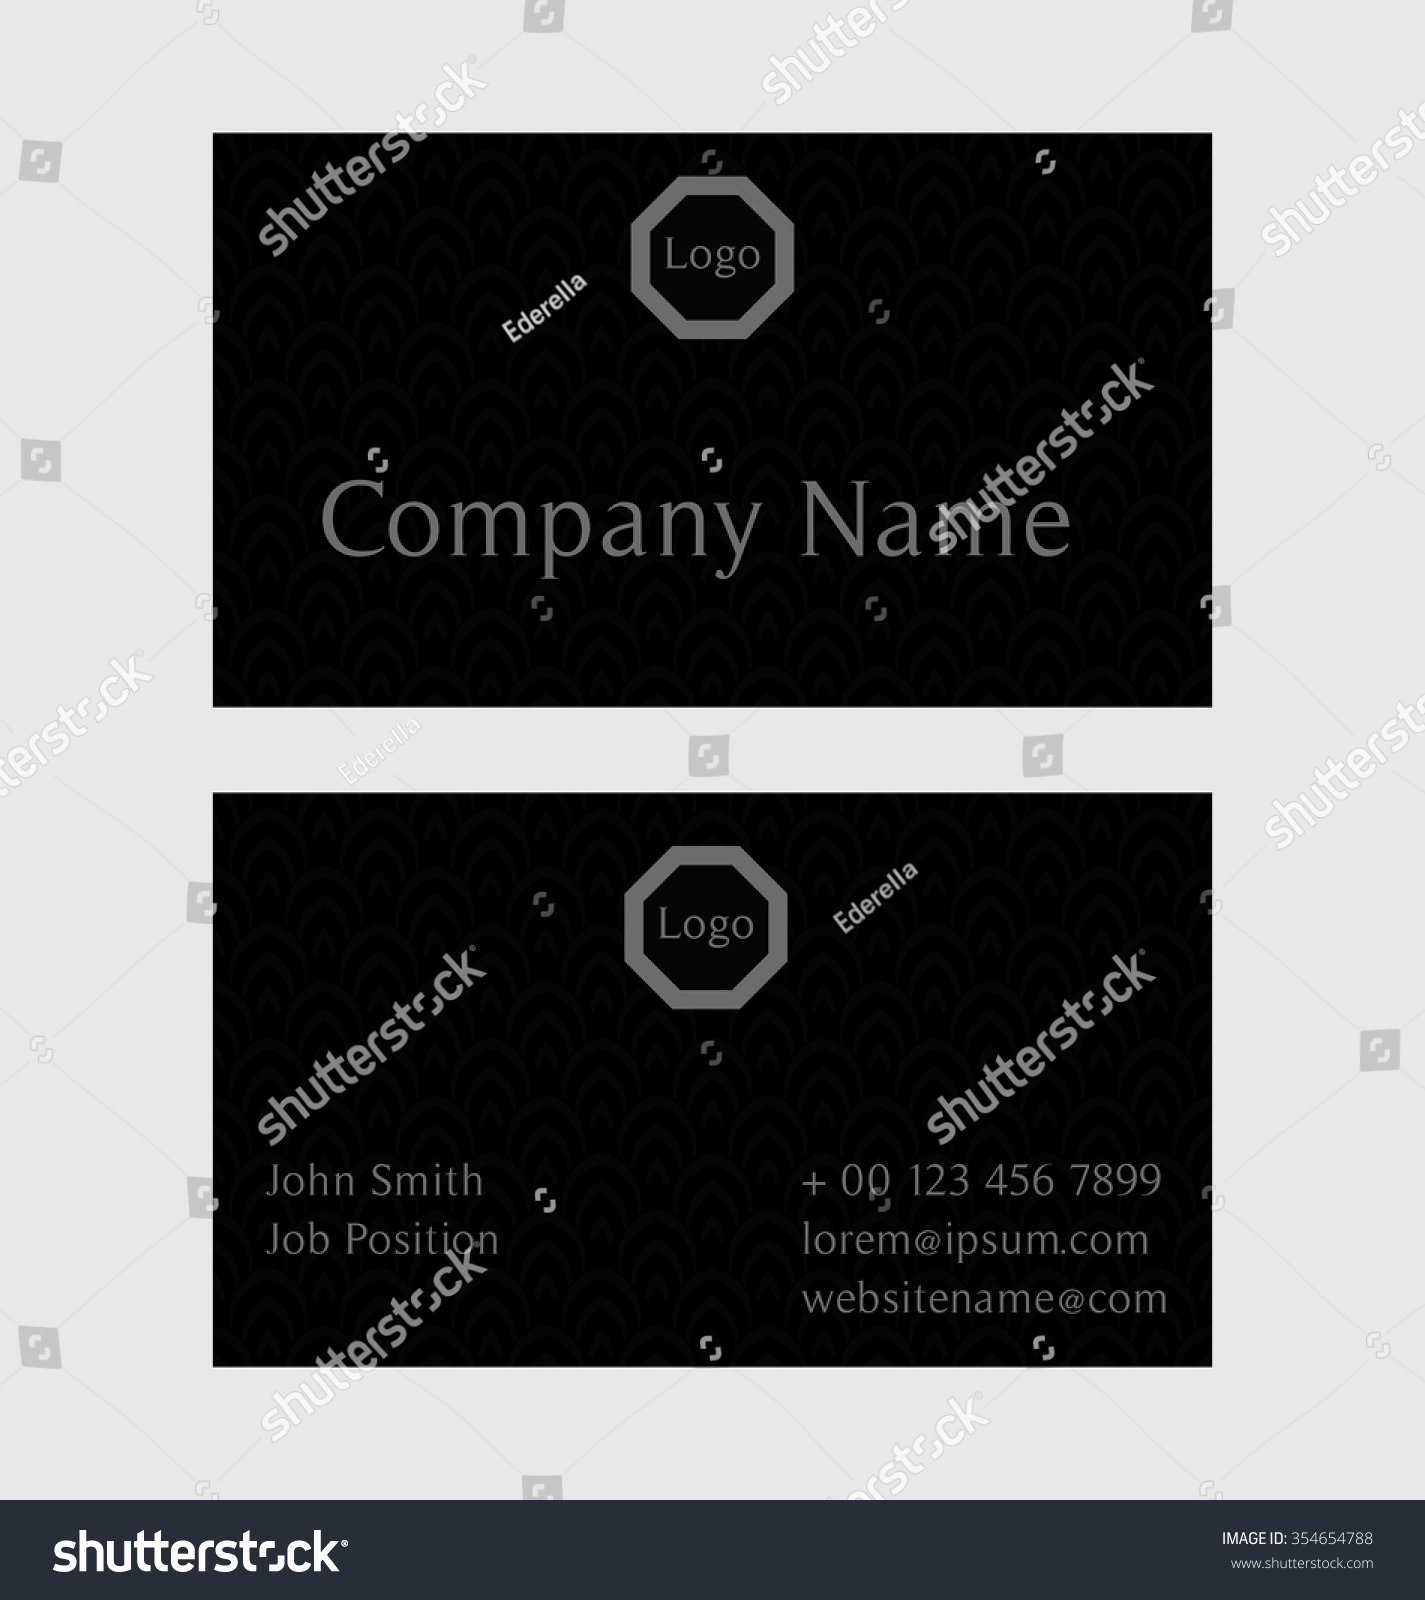 Two Sided Business Card Template Awesome Twosided Business Card Template Geometric Background Stock Vector Shutterstock